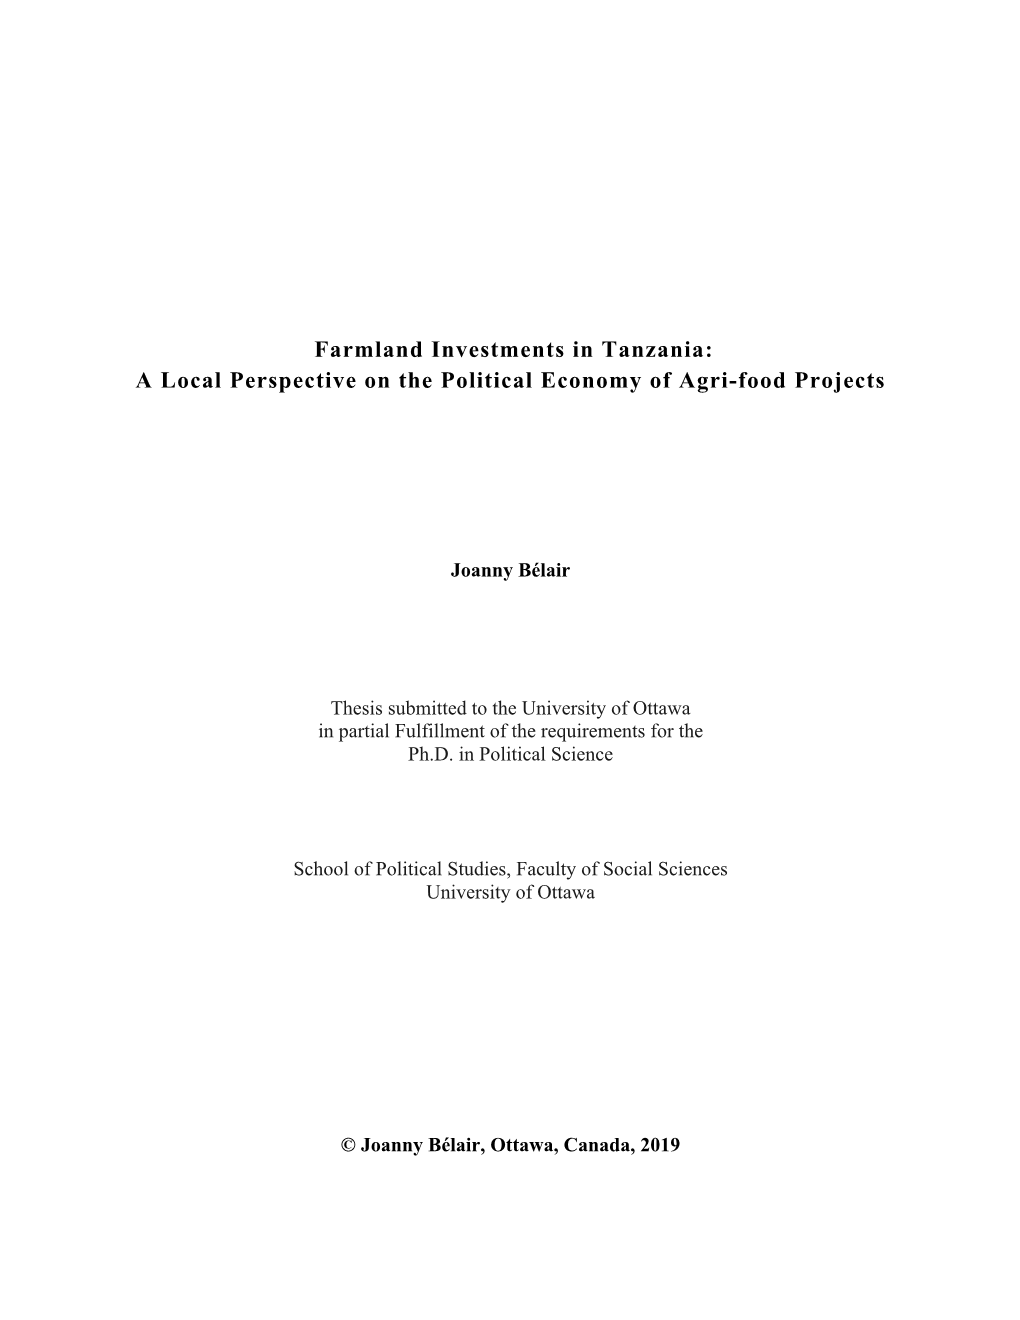 Farmland Investments in Tanzania: a Local Perspective on the Political Economy of Agri-Food Projects